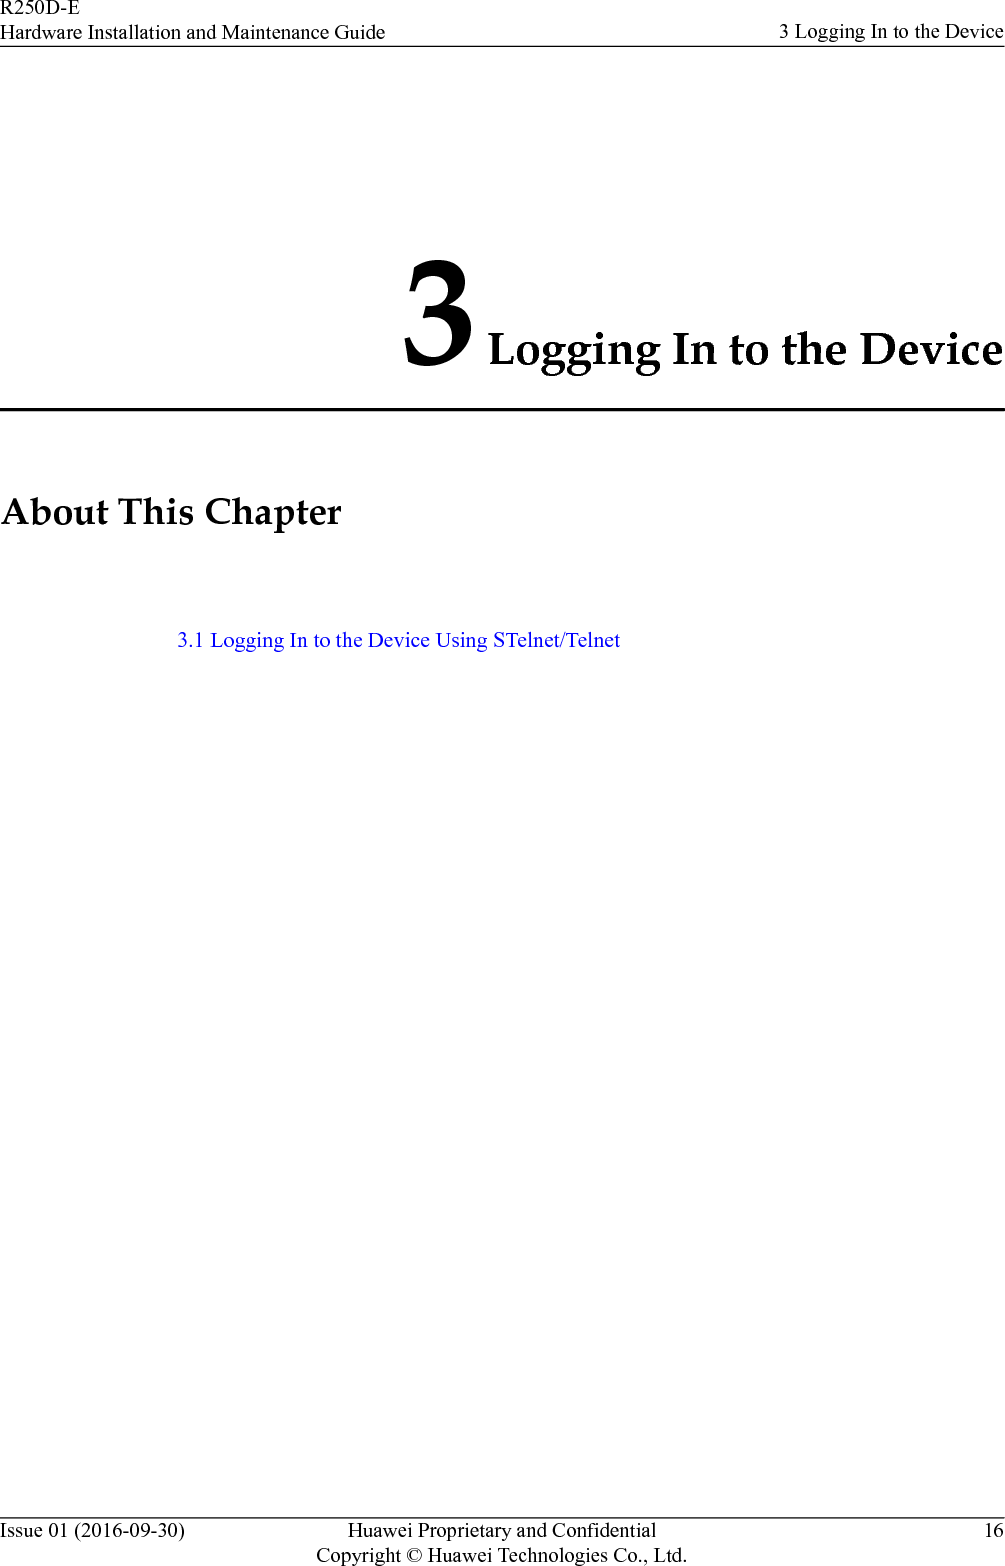 3 Logging In to the DeviceAbout This Chapter3.1 Logging In to the Device Using STelnet/TelnetR250D-EHardware Installation and Maintenance Guide 3 Logging In to the DeviceIssue 01 (2016-09-30) Huawei Proprietary and ConfidentialCopyright © Huawei Technologies Co., Ltd.16